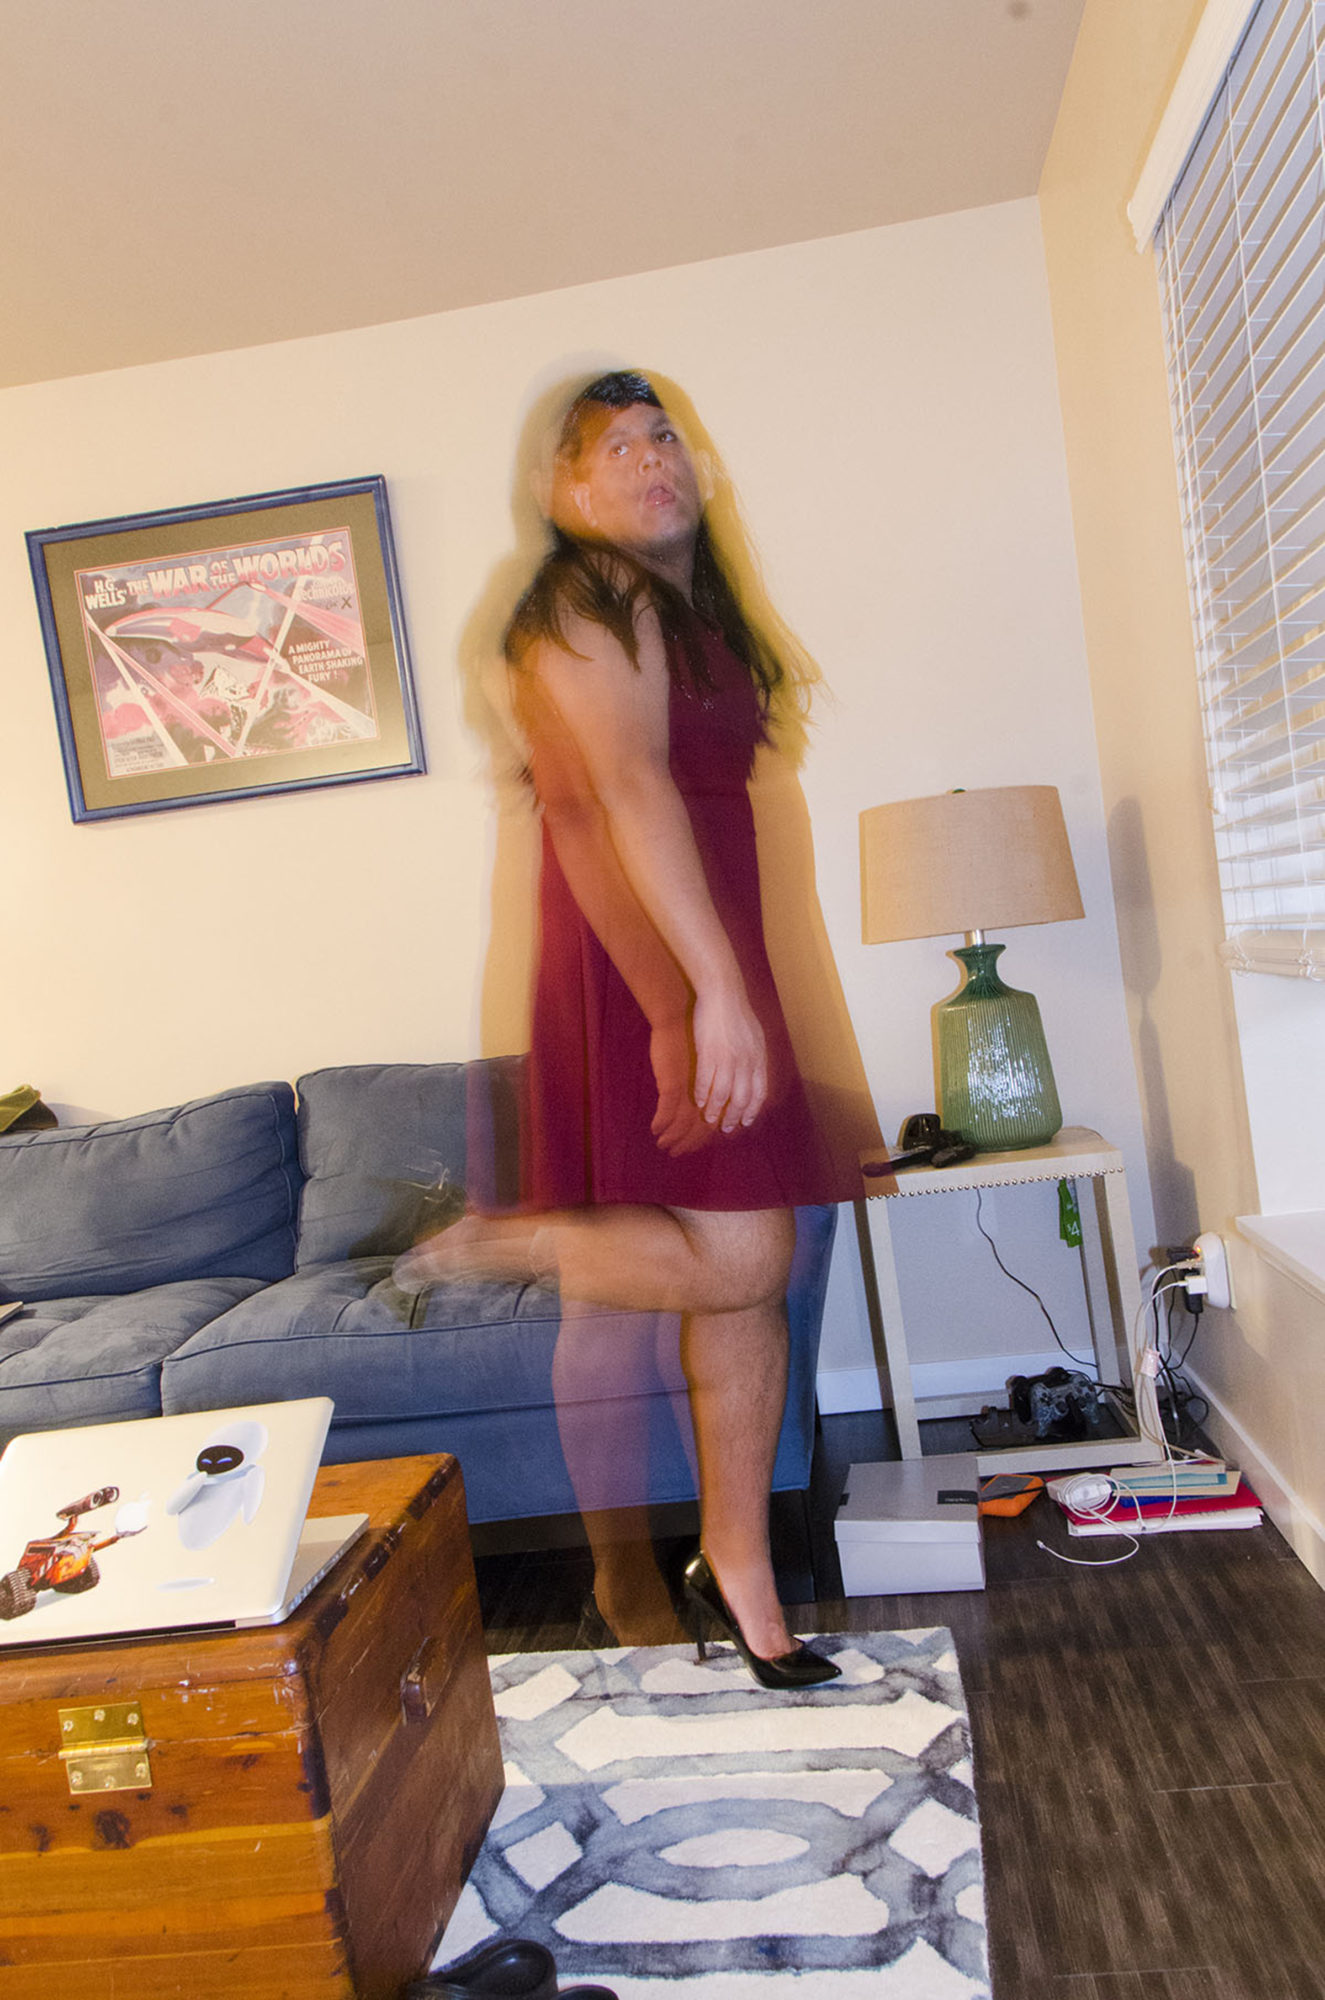 a blurred person in a dress poses in a living room